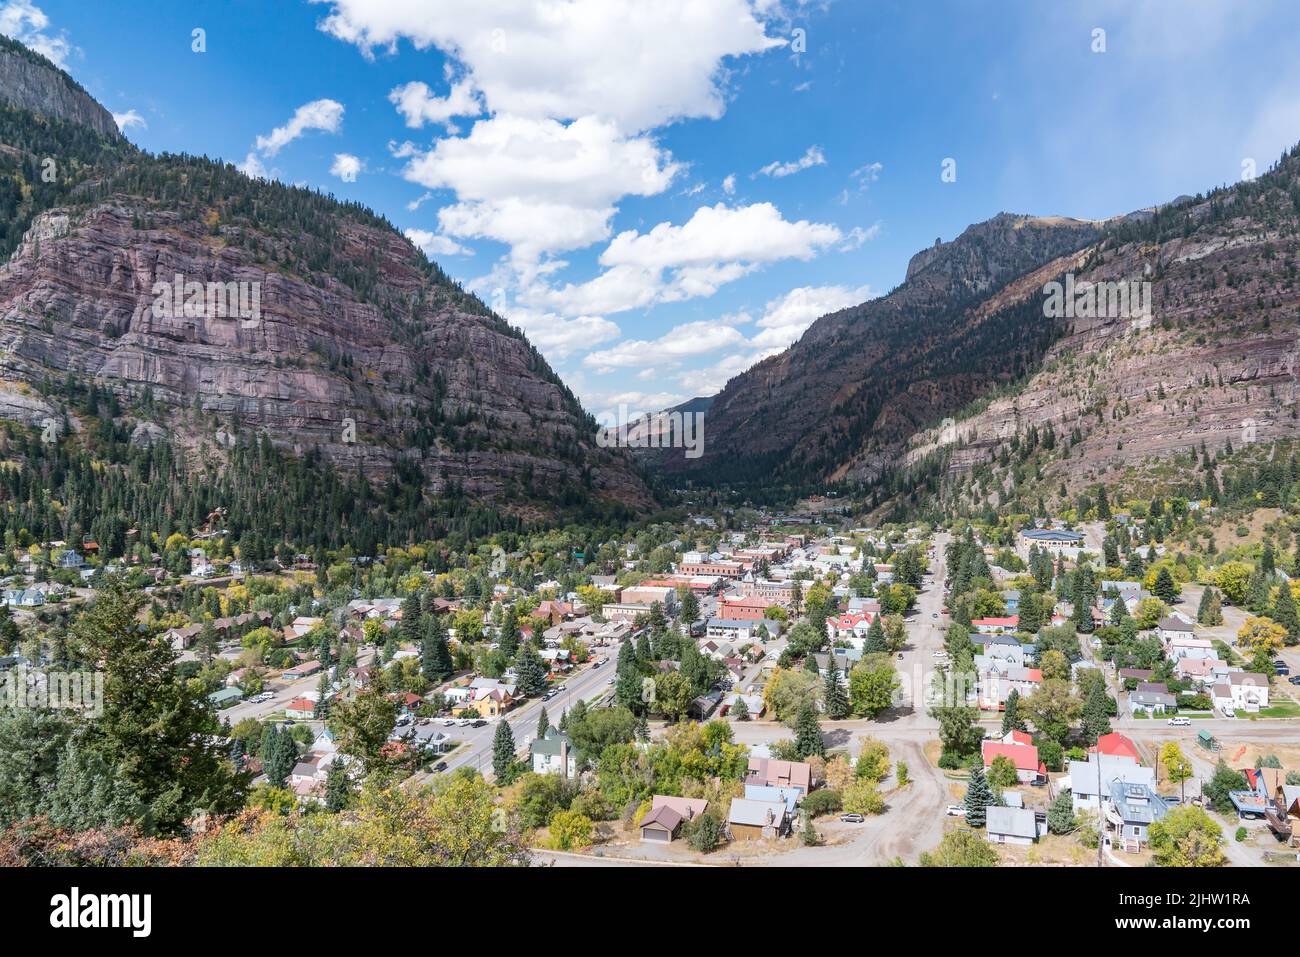 Ouray, CO - September 29, 2019: The charming alpine town of Ouray, Colorado is nestled in the San Juan Mountains of southwestern, Colorado Stock Photo